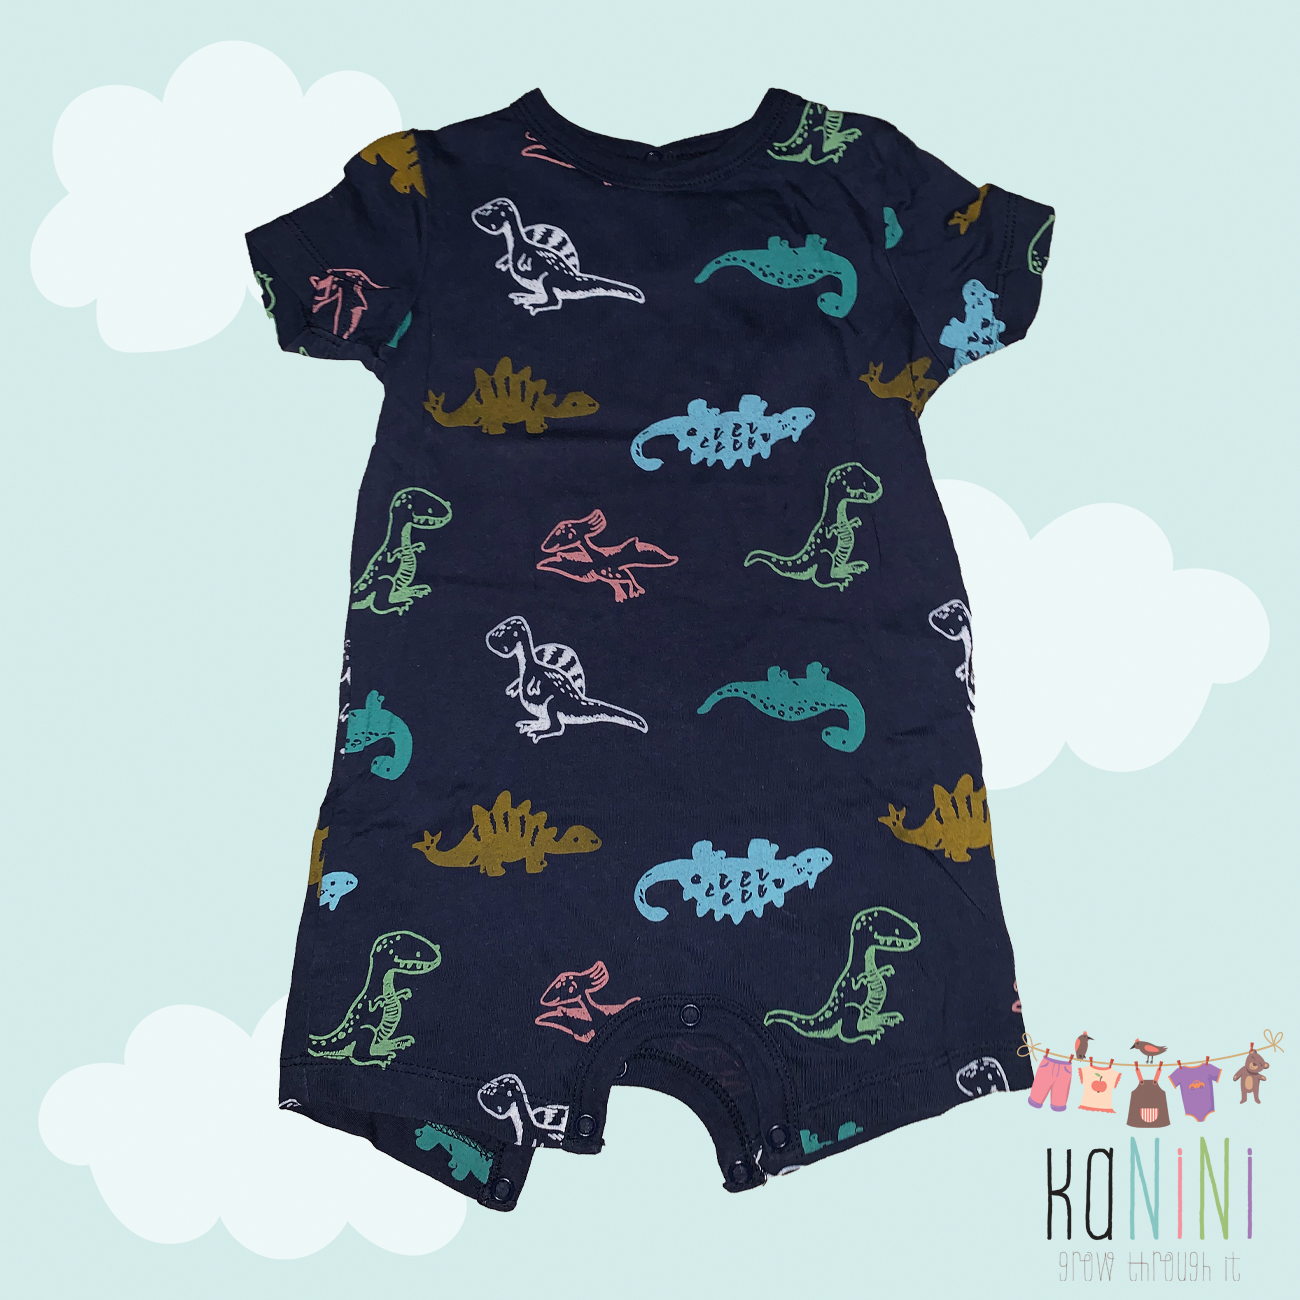 Featured image for “Woolworths 6 - 12 Months Boys Navy Romper”